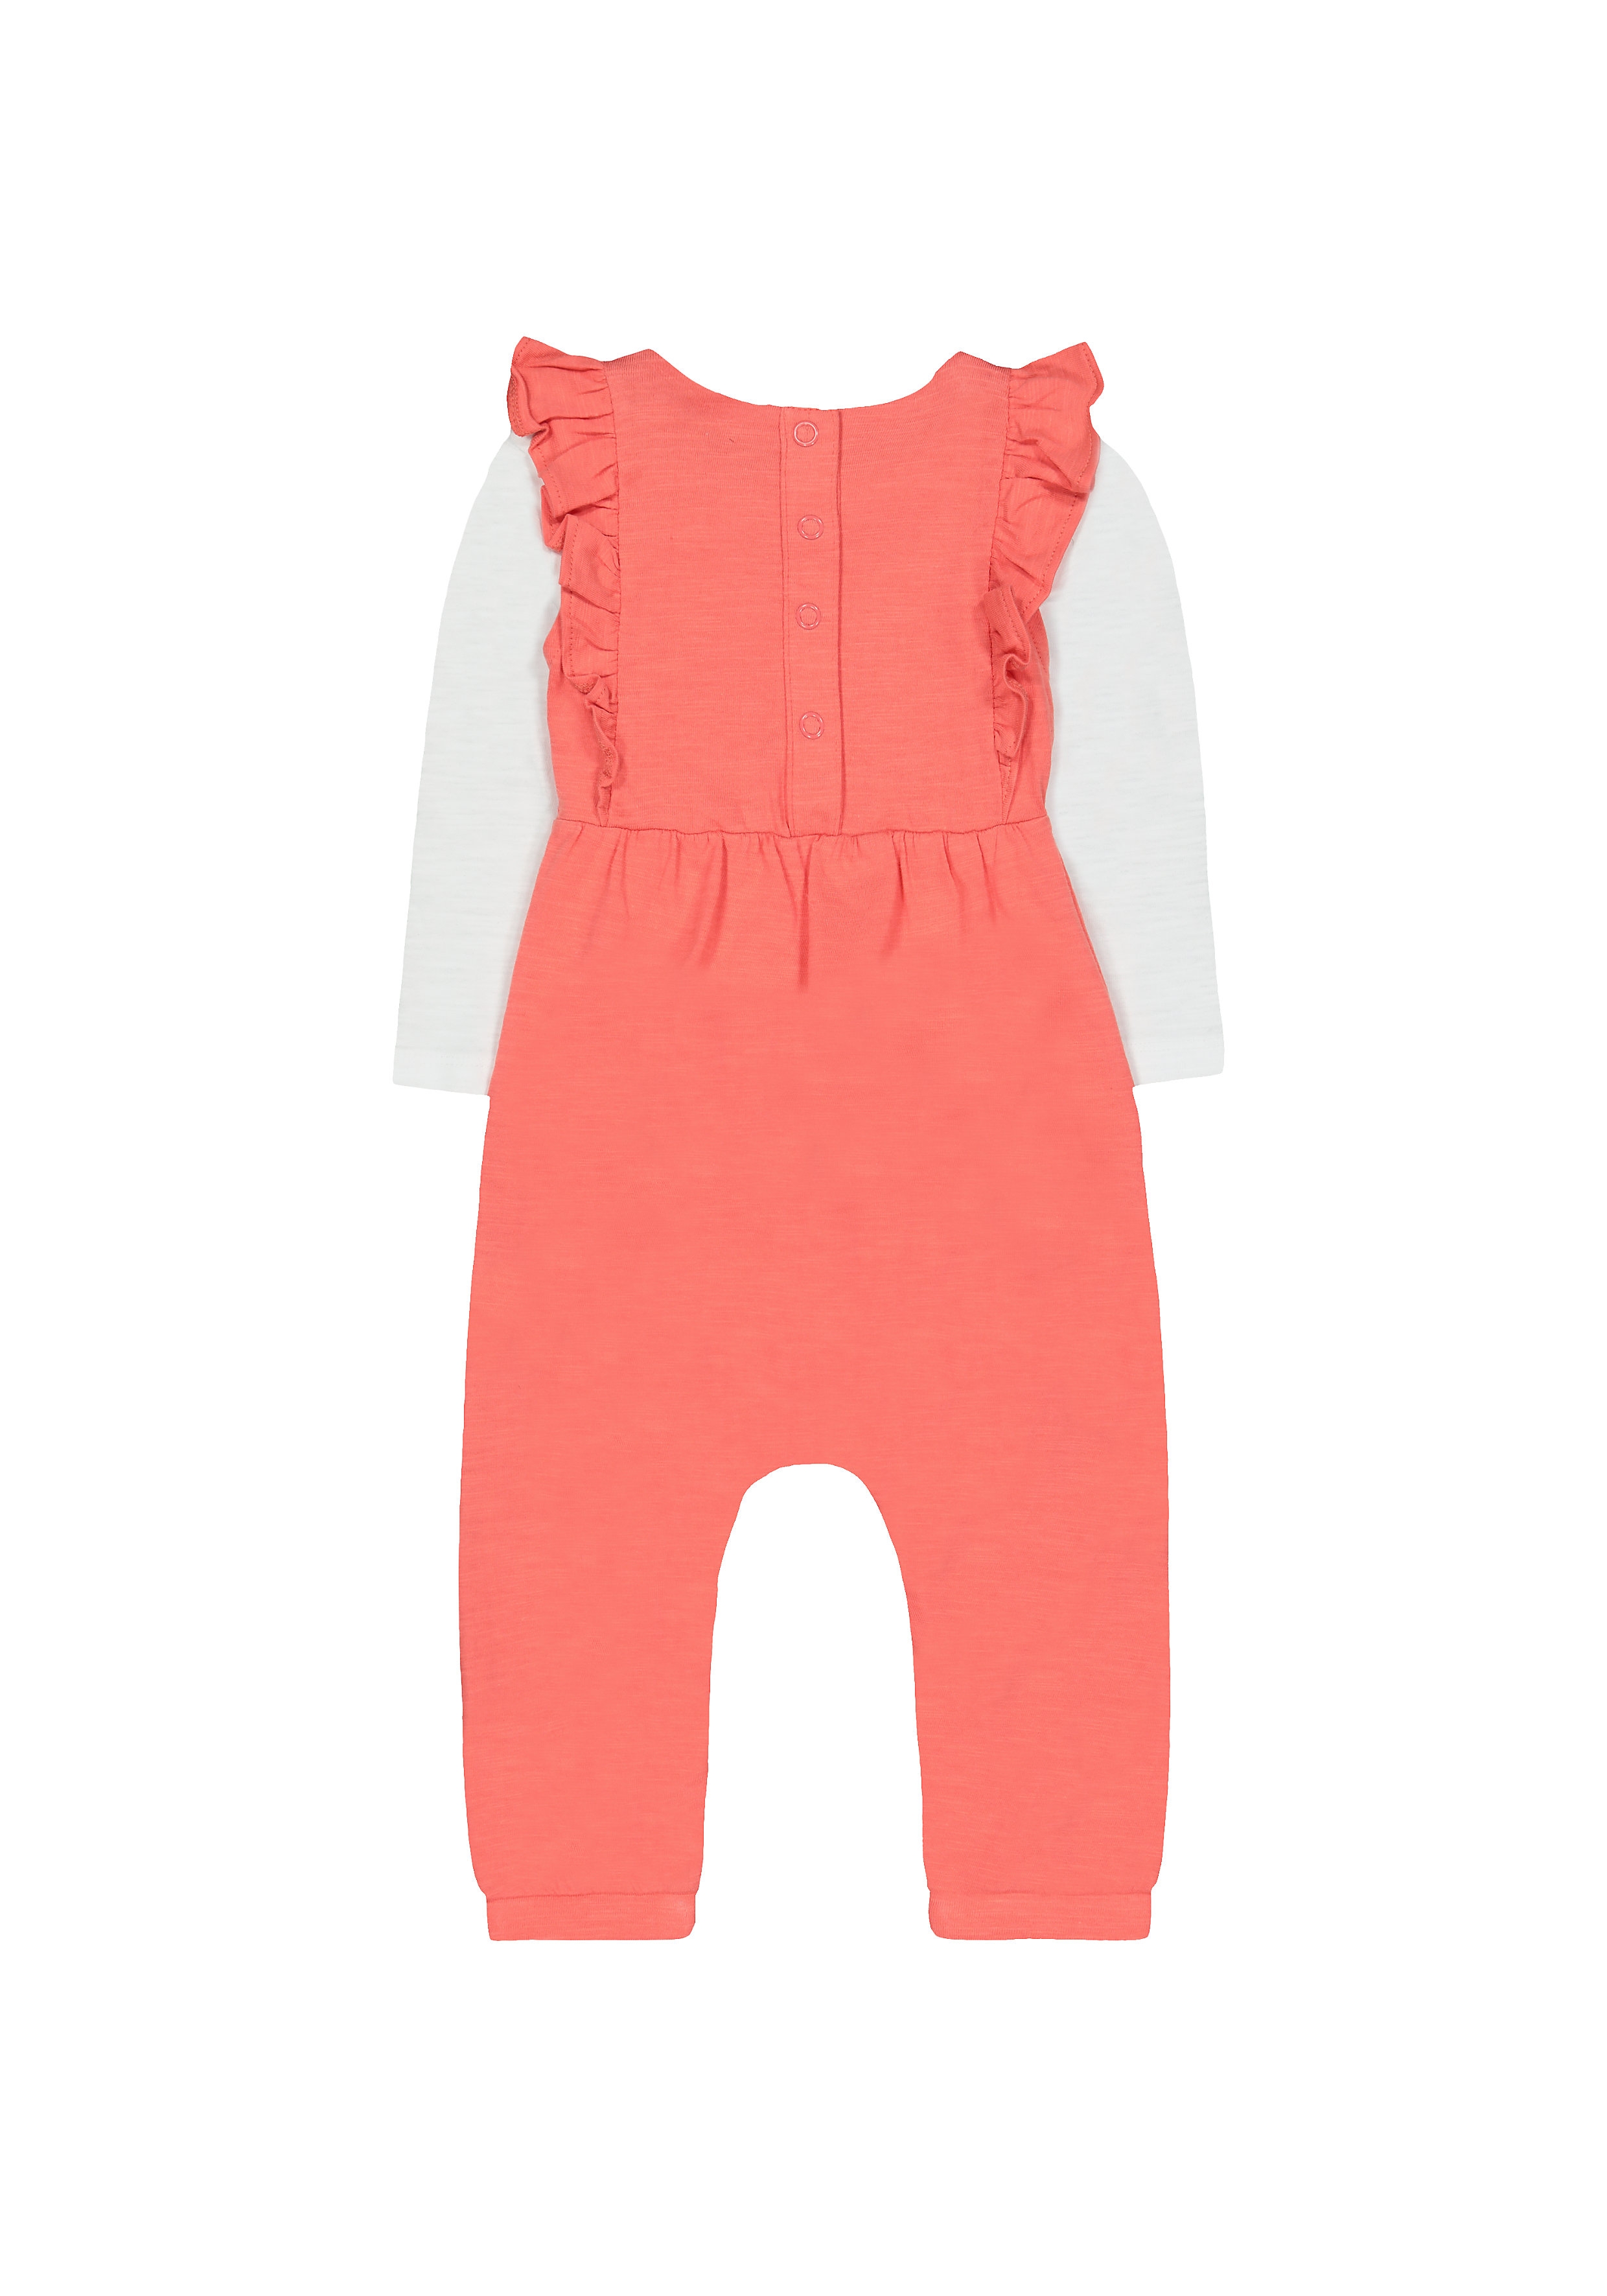 Mothercare | Girls Full Sleeves Dungaree Set Floral Embroidery - Coral 1